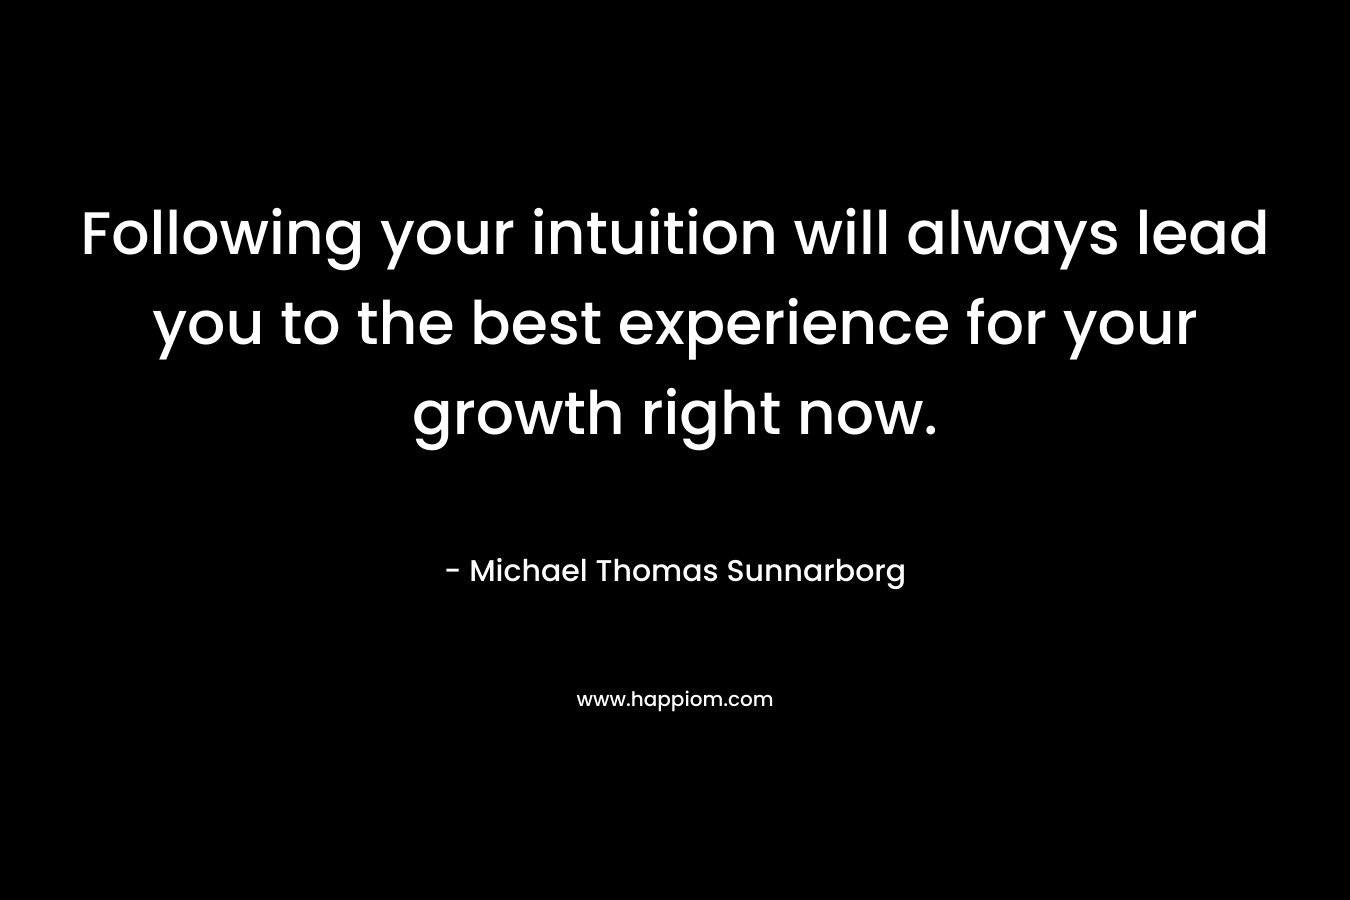 Following your intuition will always lead you to the best experience for your growth right now.